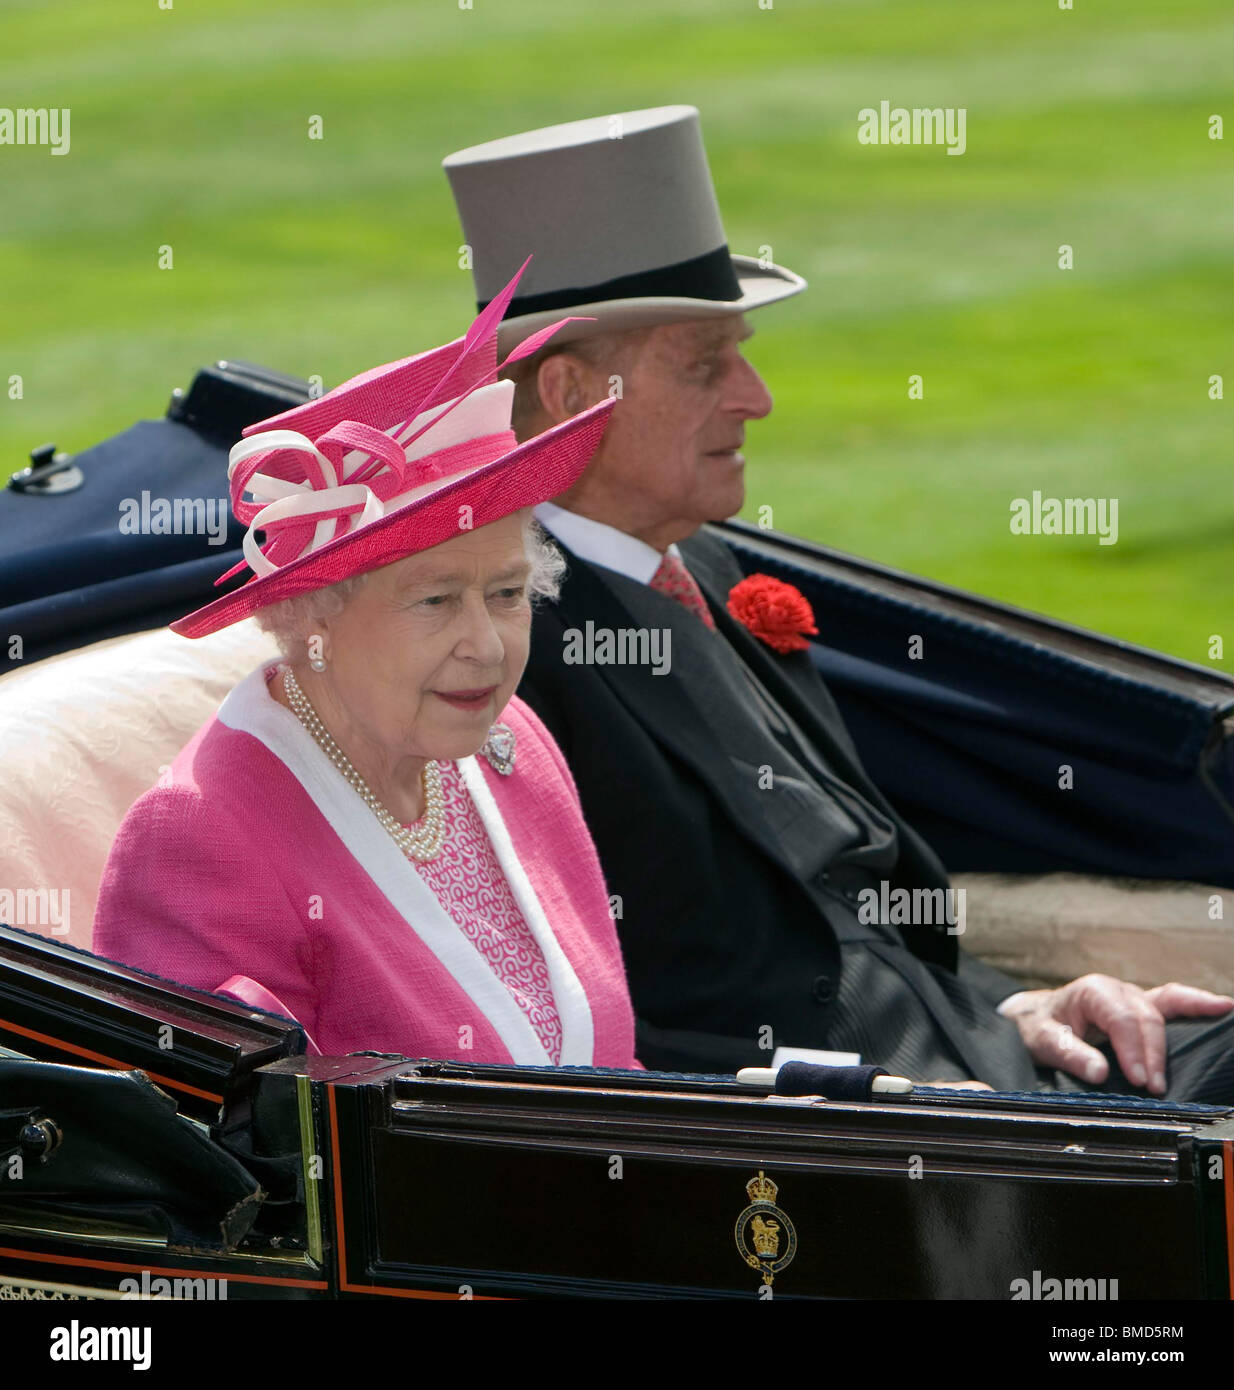 Britain's Queen Elizabeth II at the Royal Ascot race meeting in 2009 held annually in June at Ascot race course in Berkshire Stock Photo